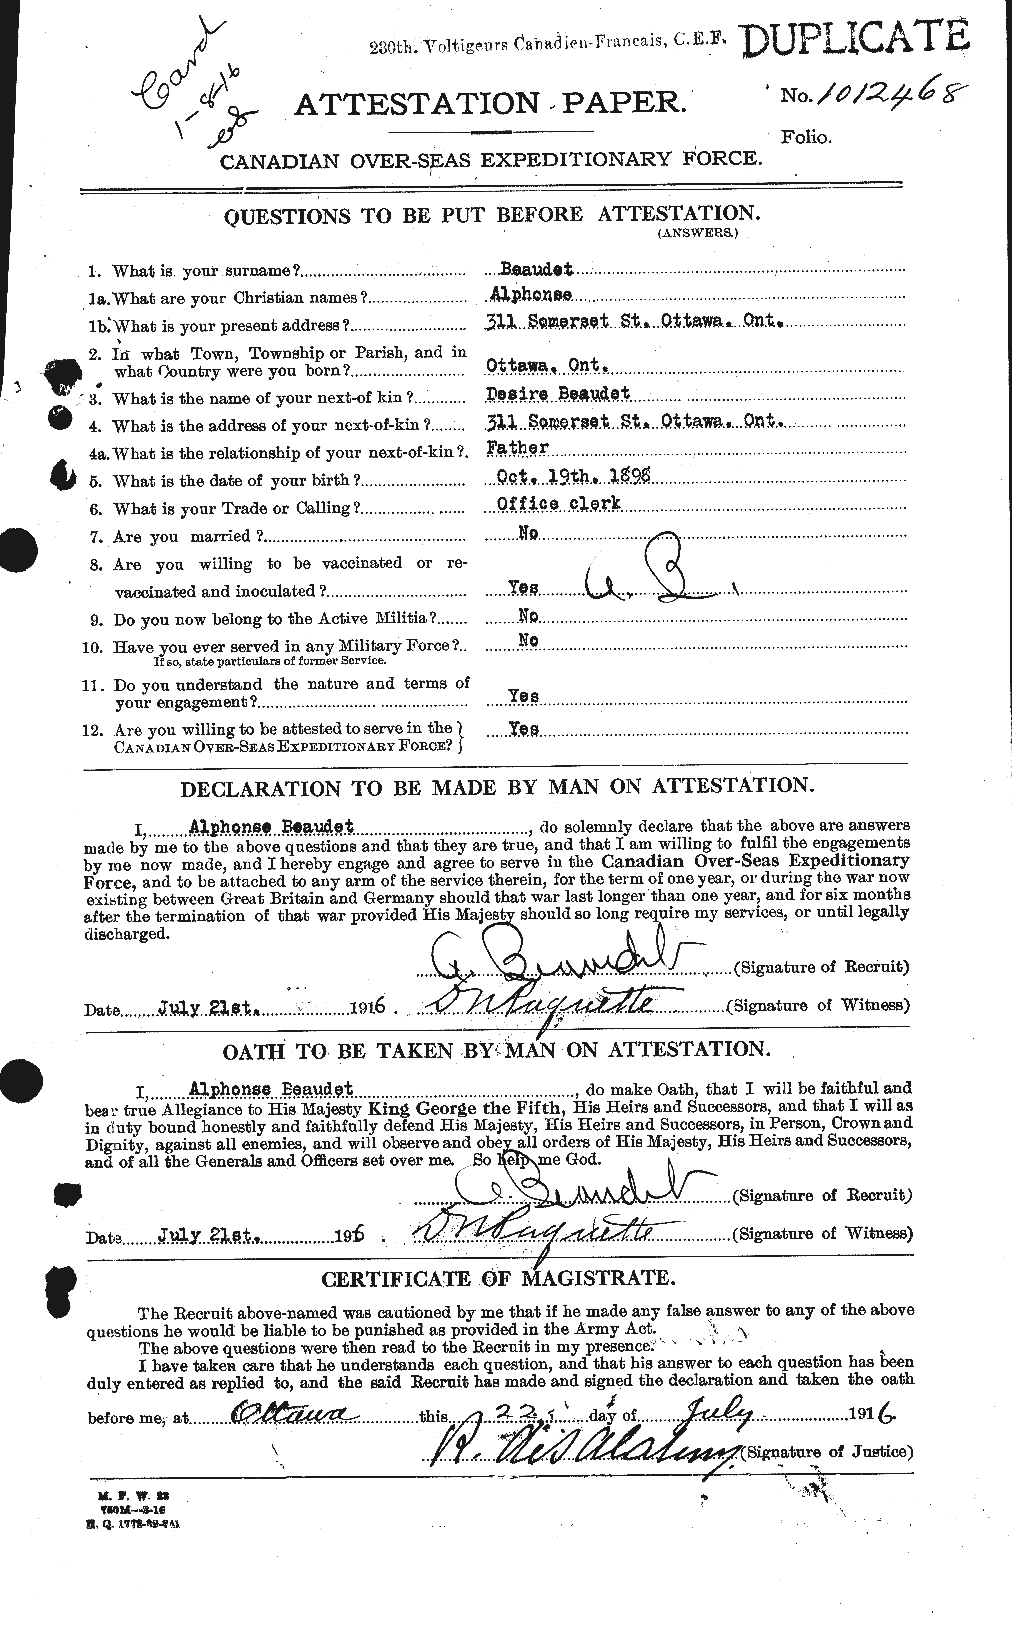 Personnel Records of the First World War - CEF 231100a